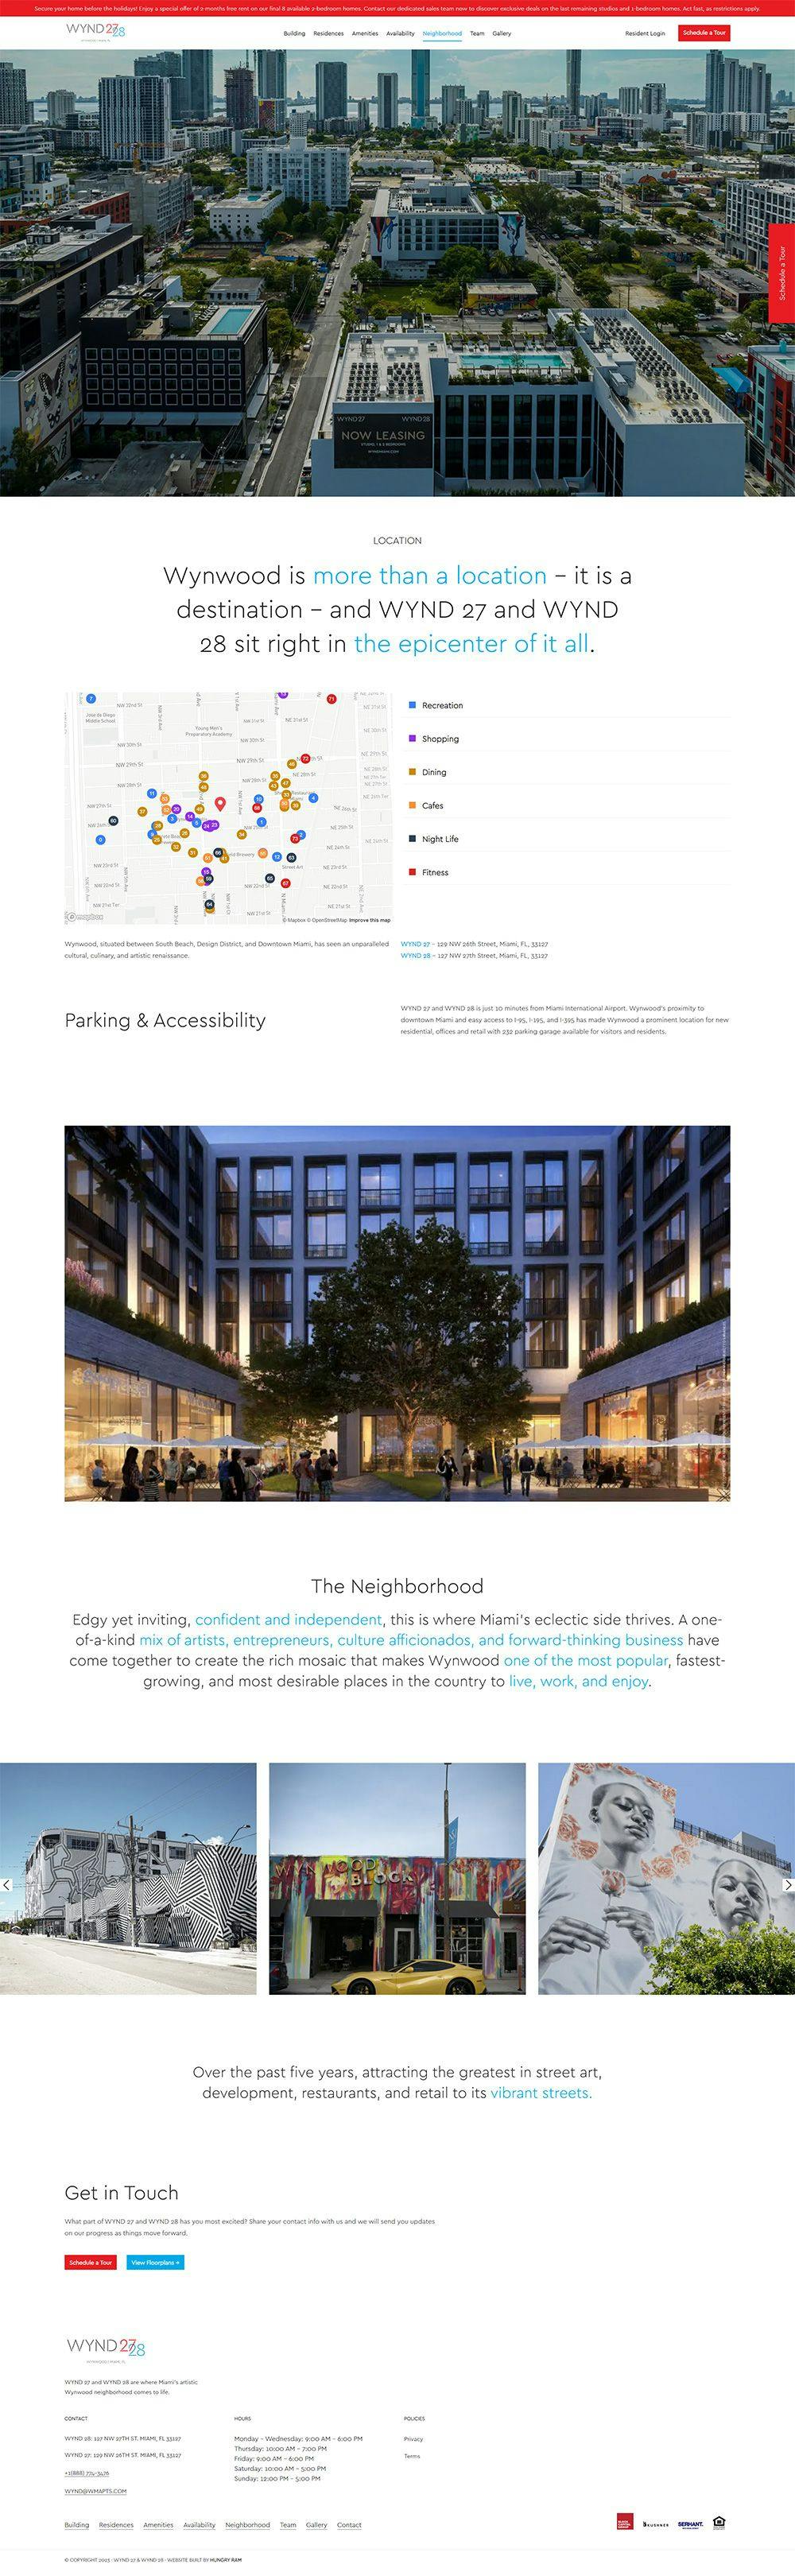 Wynd Miami website design full page